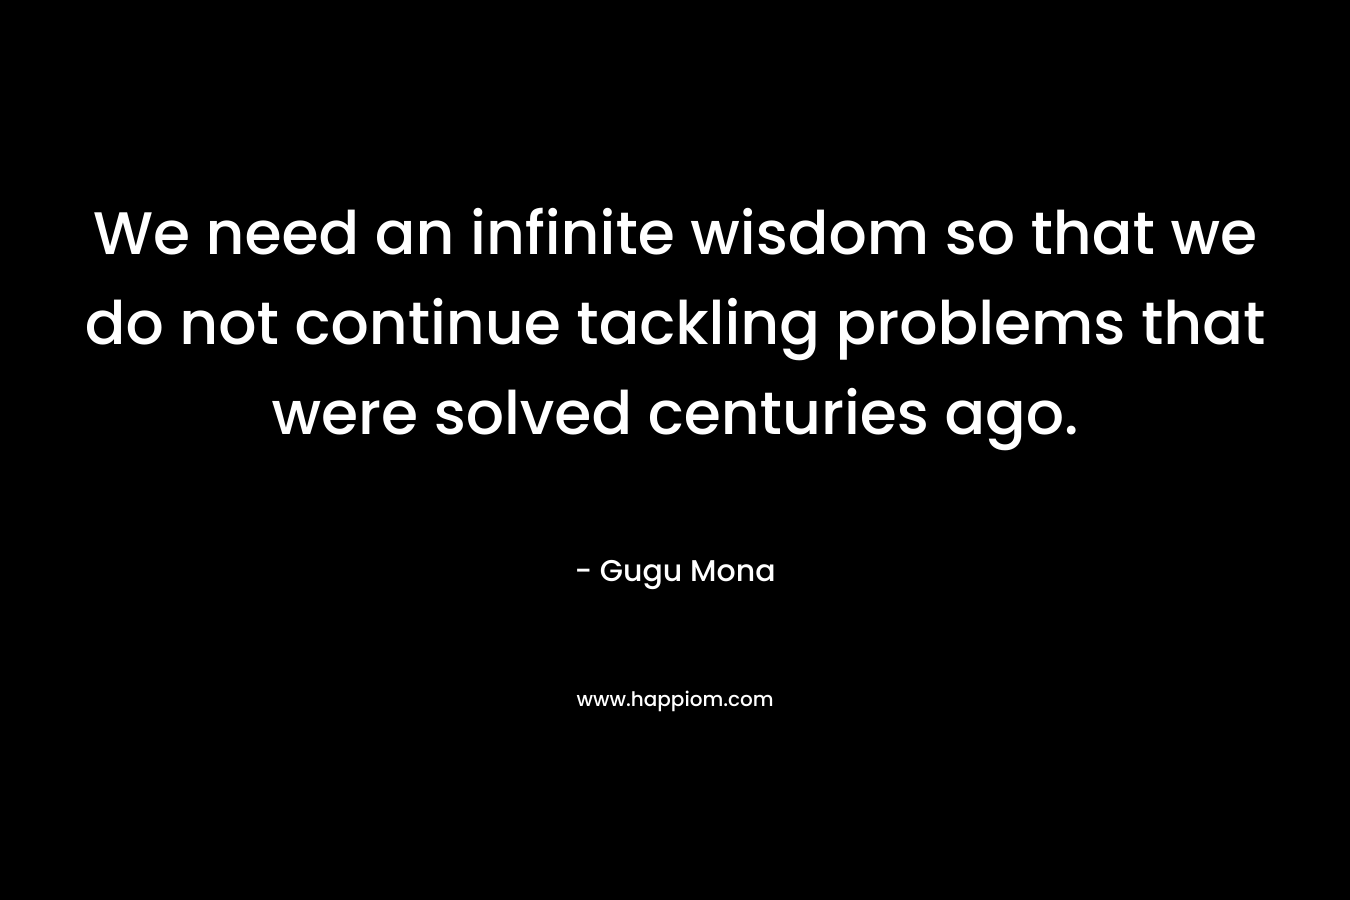 We need an infinite wisdom so that we do not continue tackling problems that were solved centuries ago. – Gugu Mona